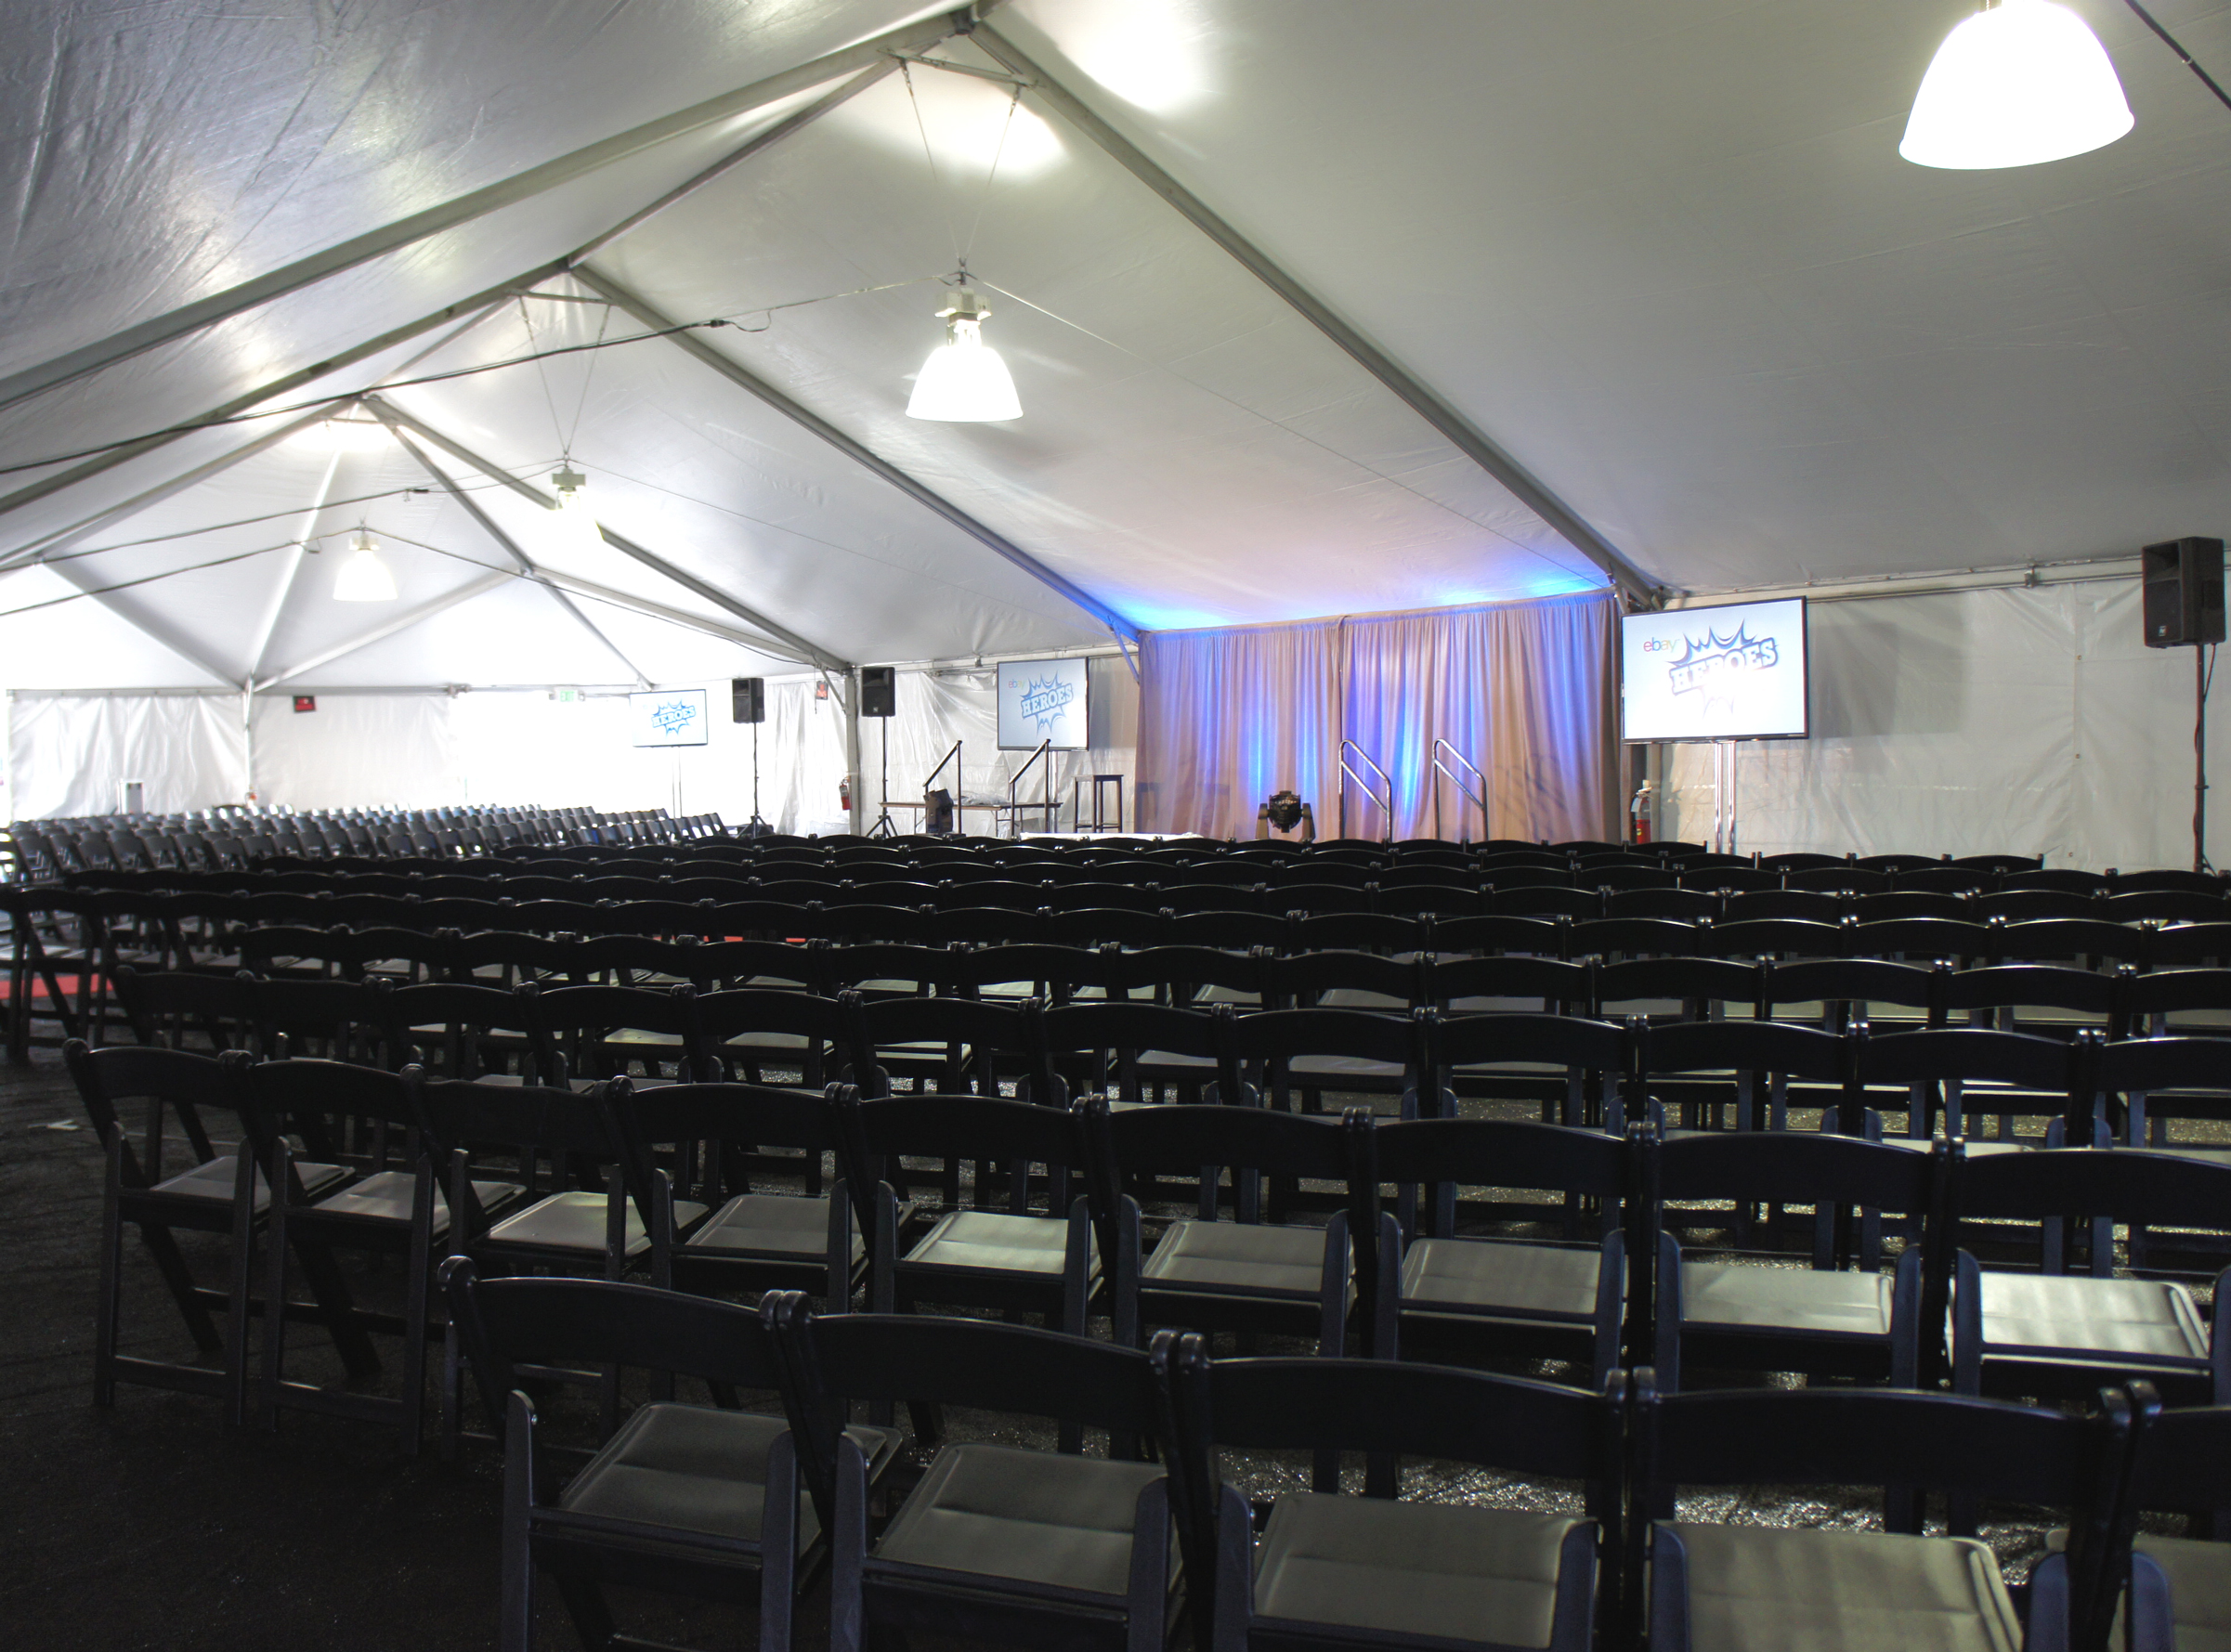 Theater-style Seating in Presentation Tent